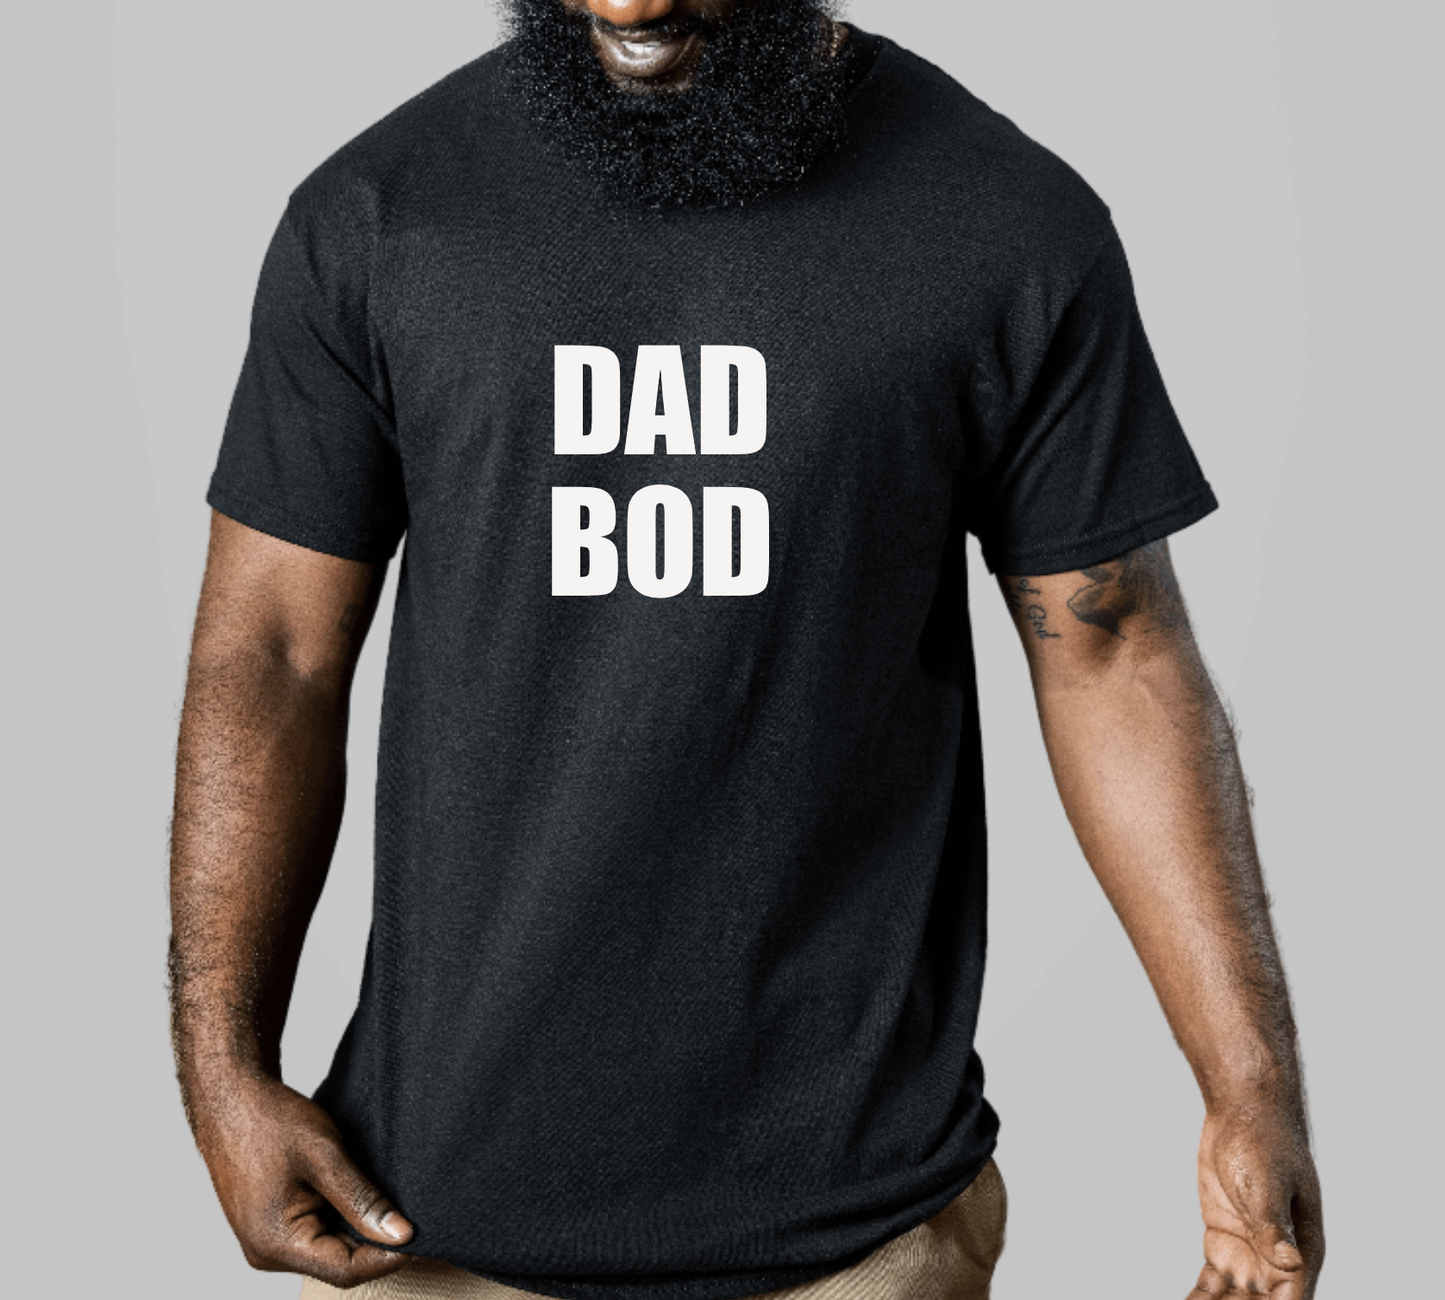 Hunter Kouture - DAD BOD Black T-Shirt, Gift for Father's Day, Dad Shirts